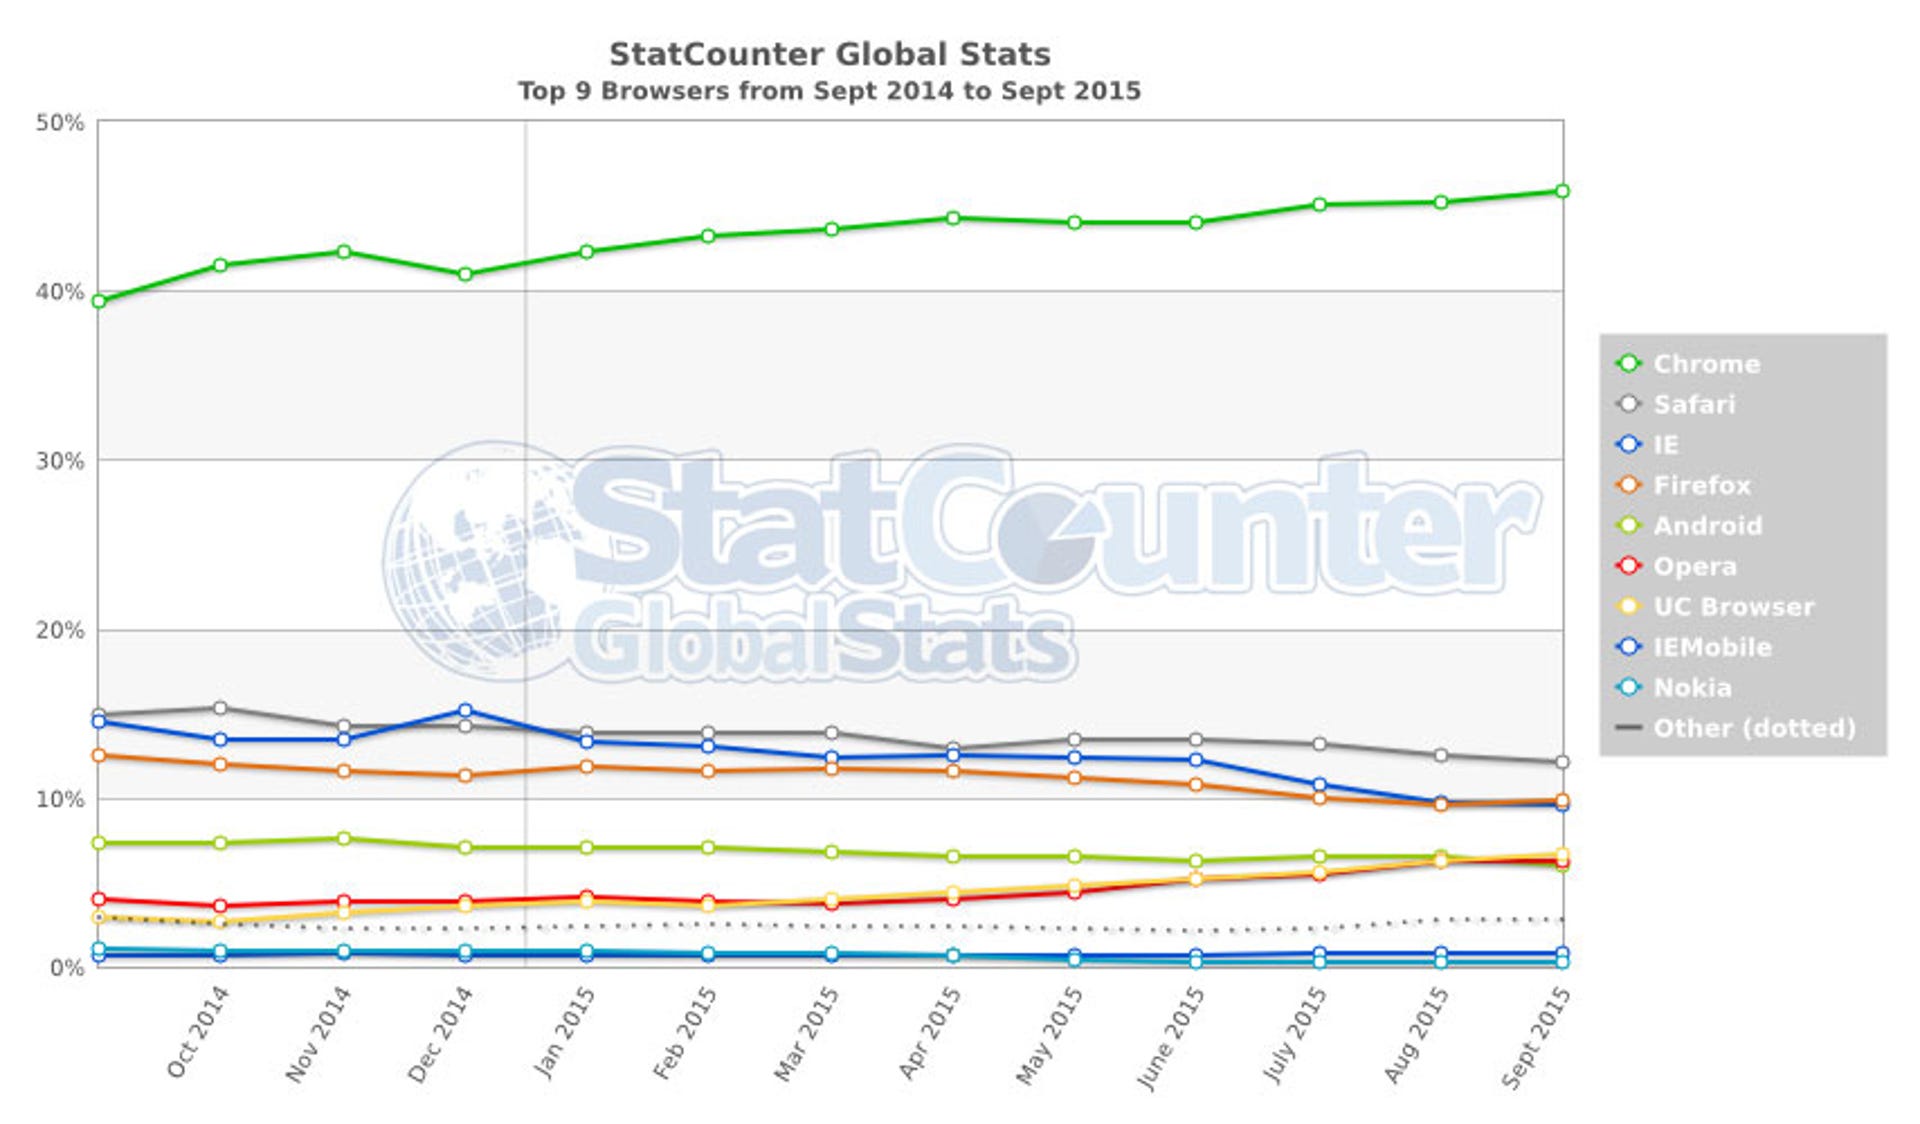 Firefox's share of global browser usage is steadily slipping while Google Chrome increases.